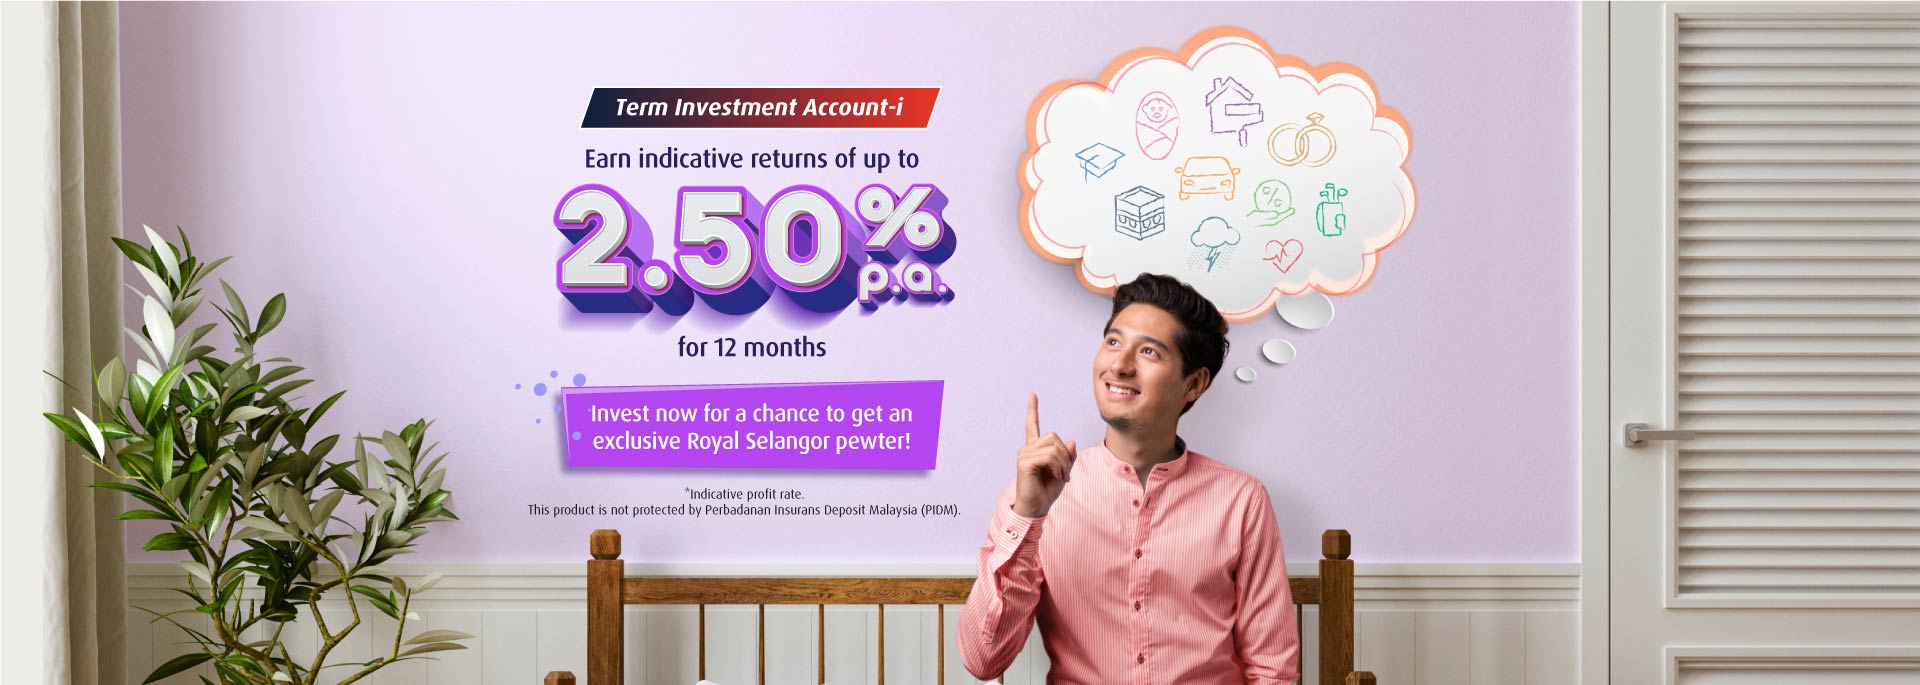 Term Investment Account-i Promotions